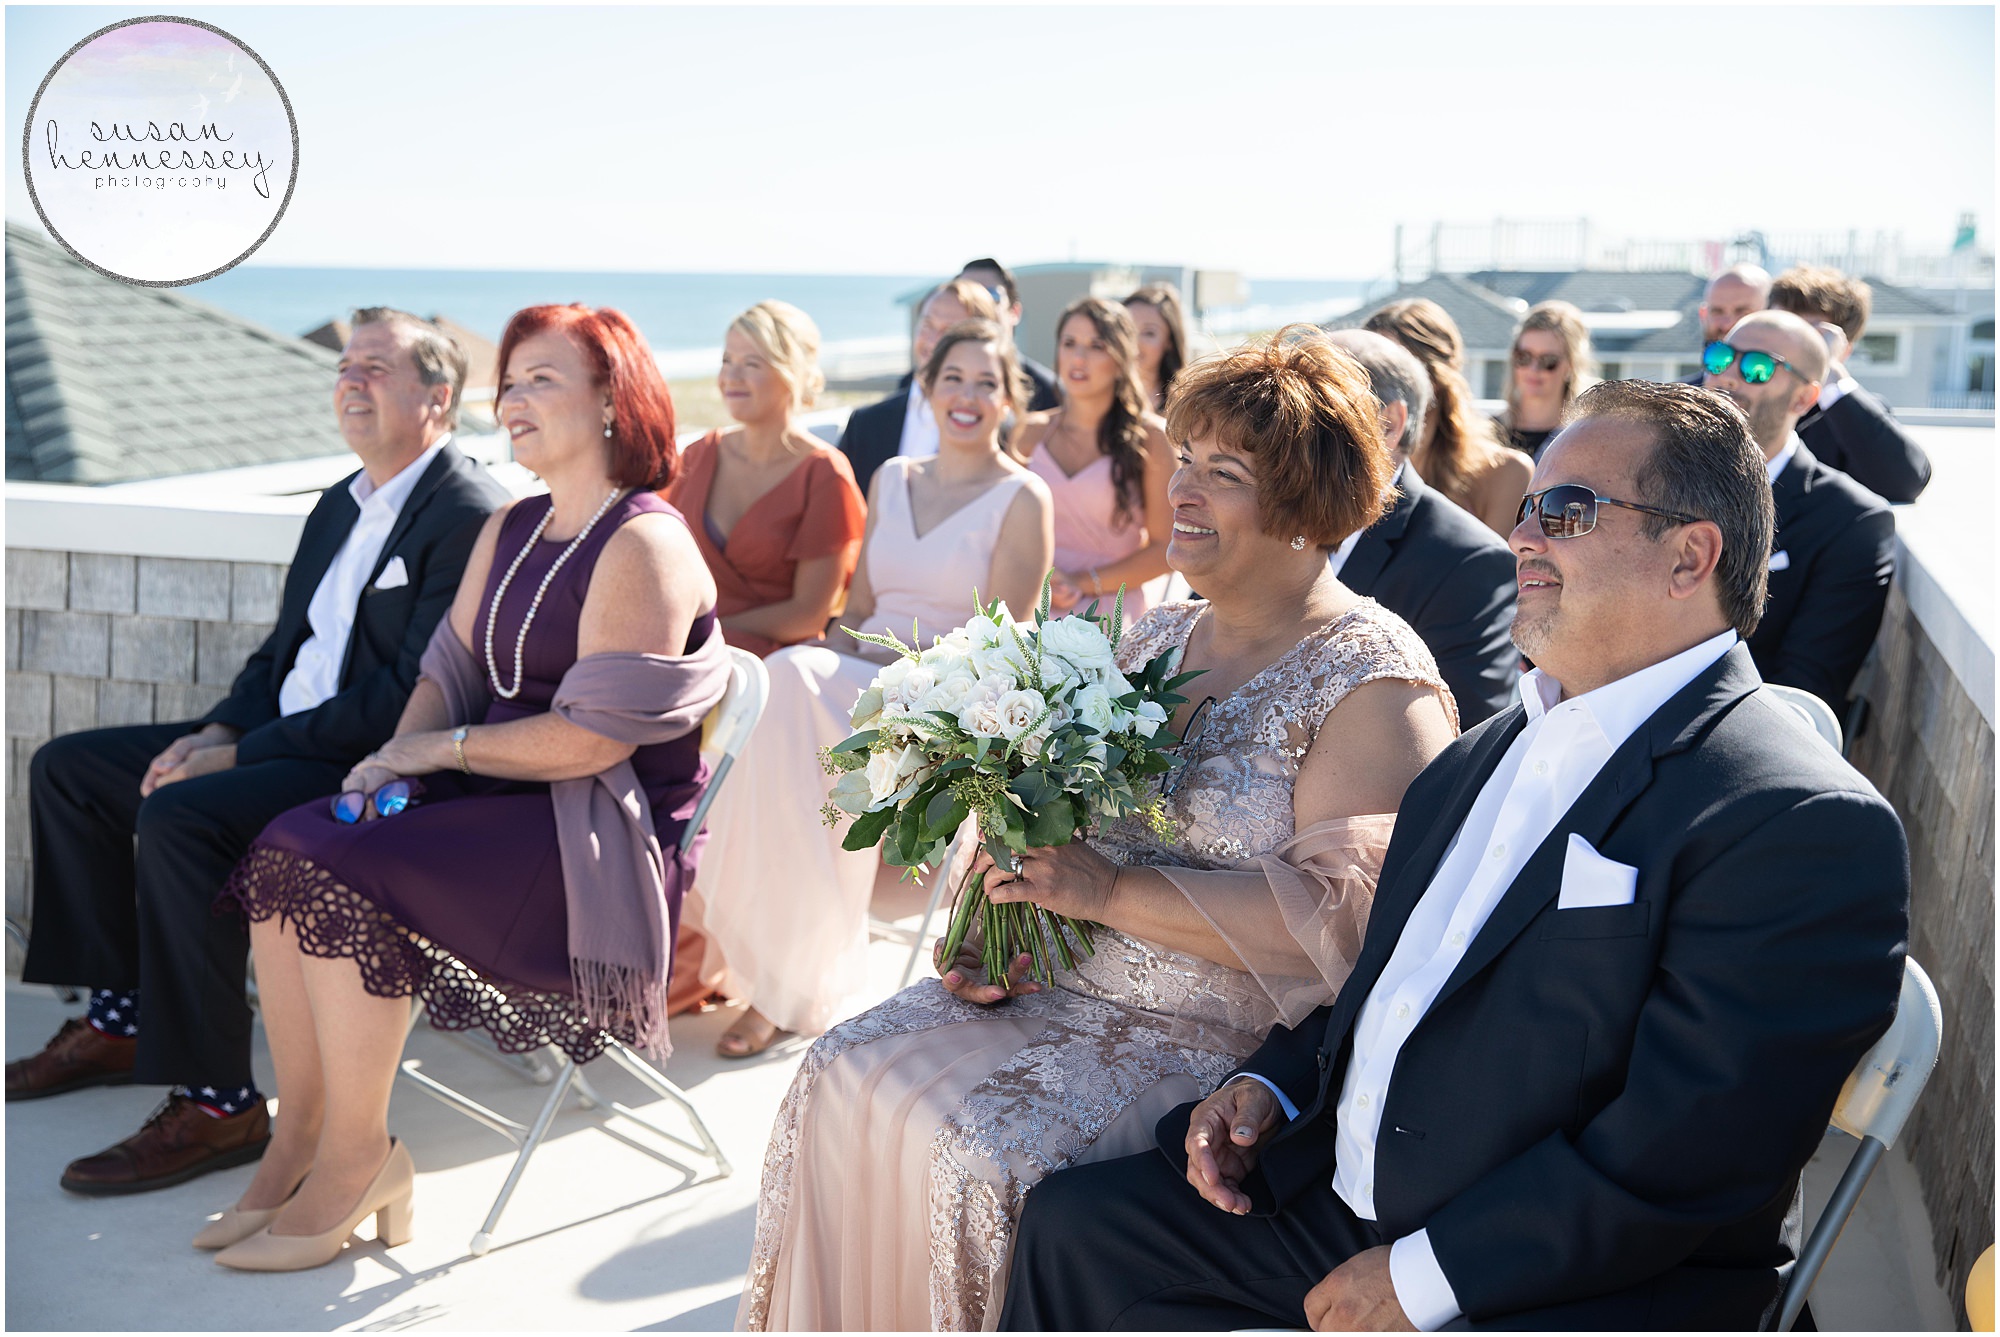 Guests watch wedding ceremony at Long Beach Island Microwedding